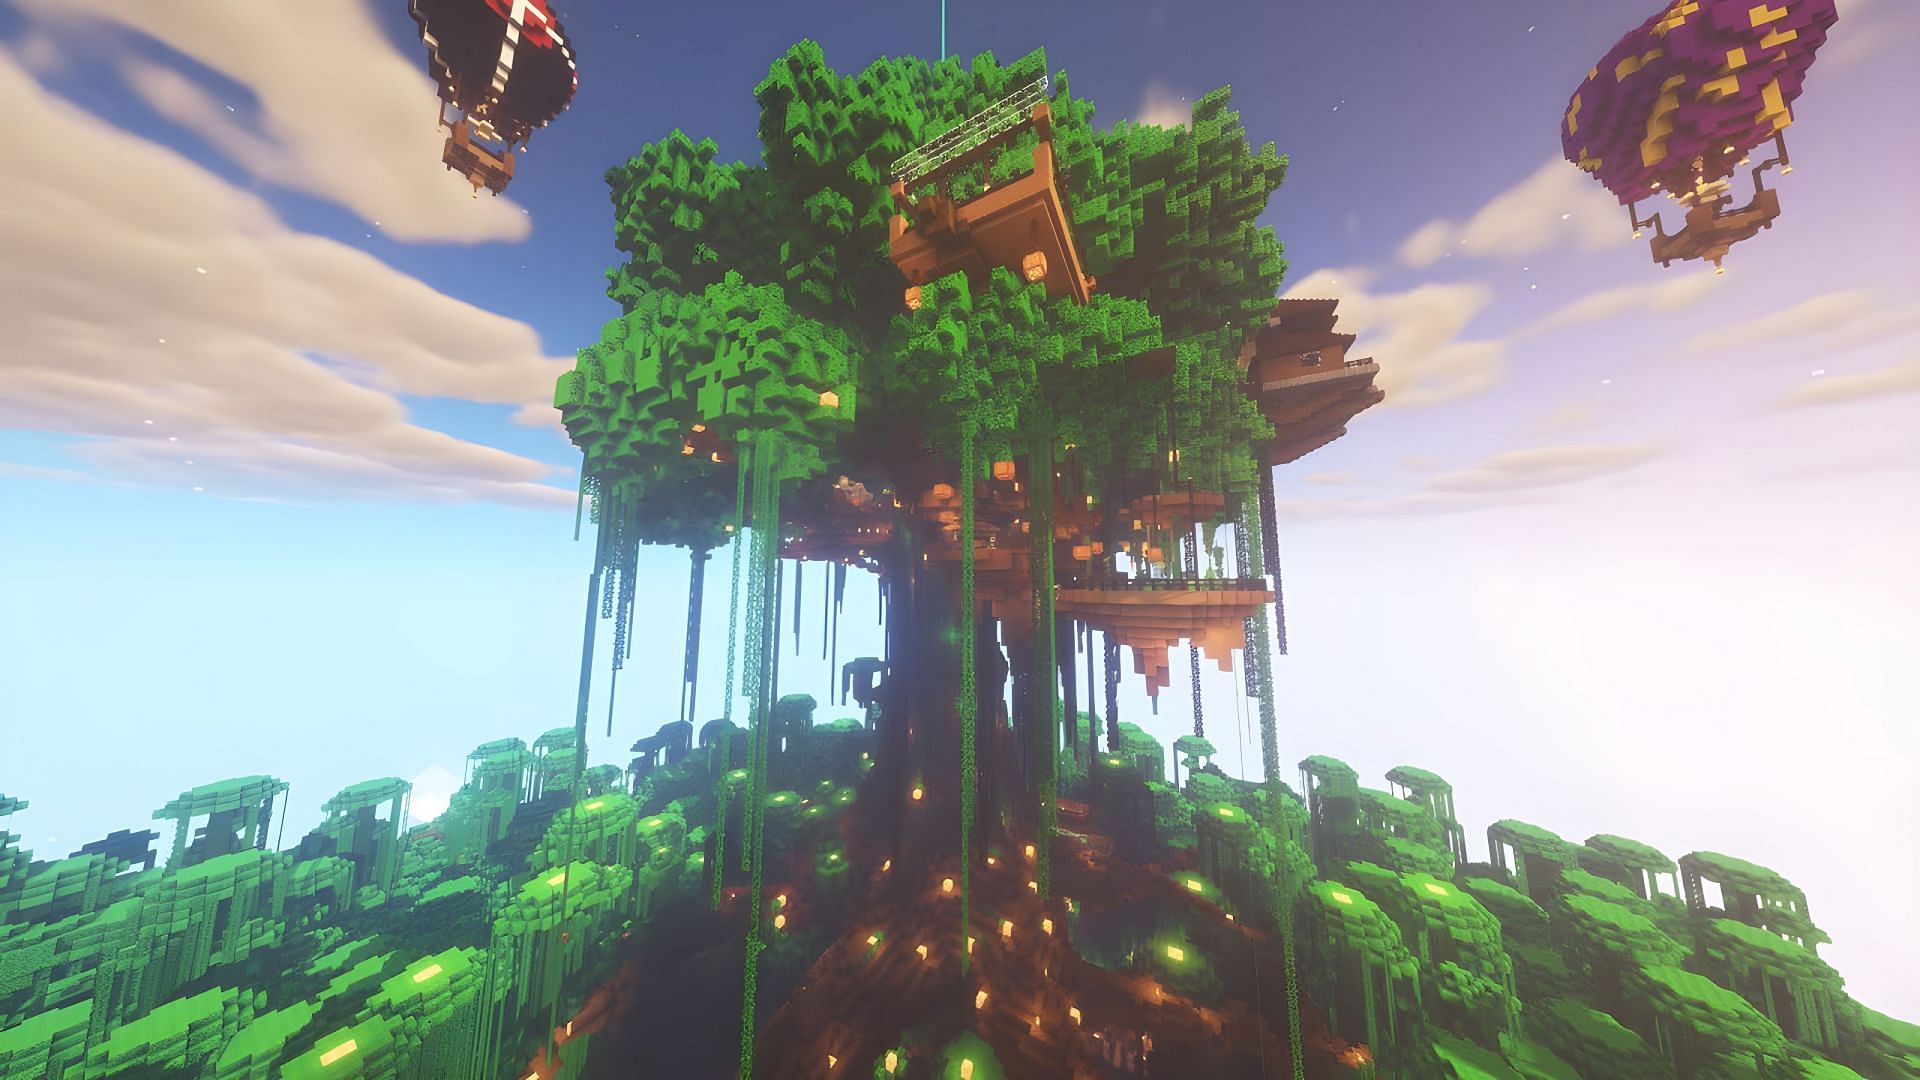 Tree houses are so fun to build in Minecraft (Image via Youtube/AttackingTucans)